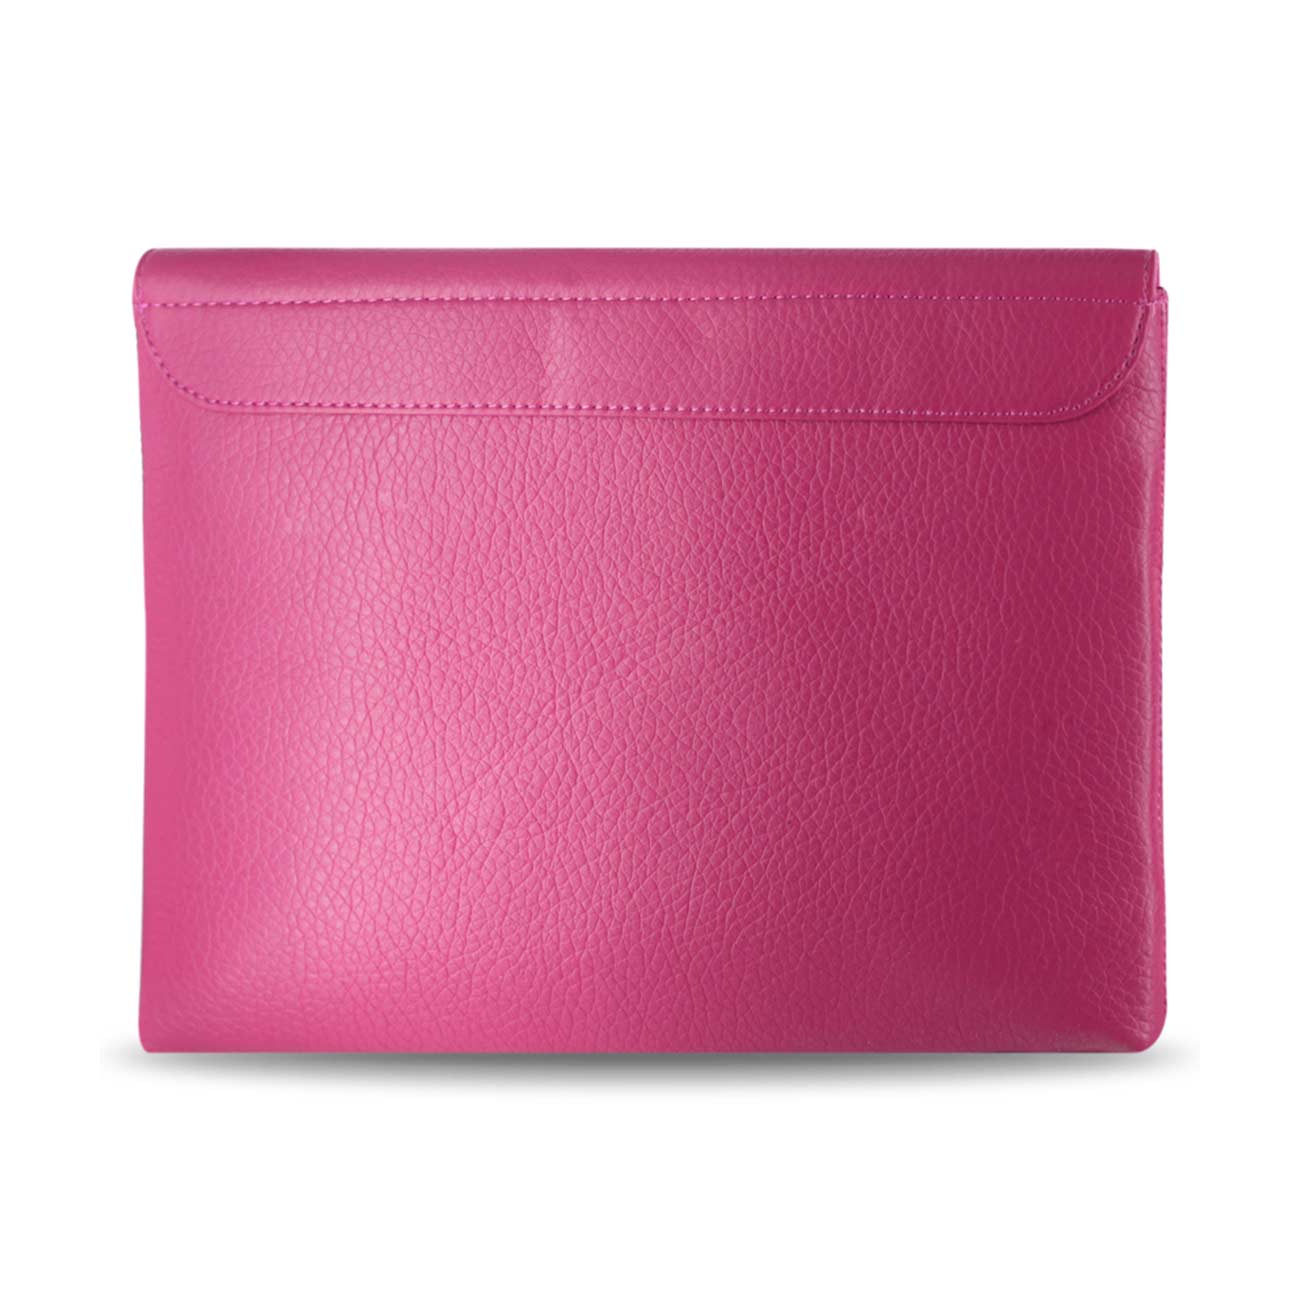 Pouch Tablet iPad Premium Hot Pink Color